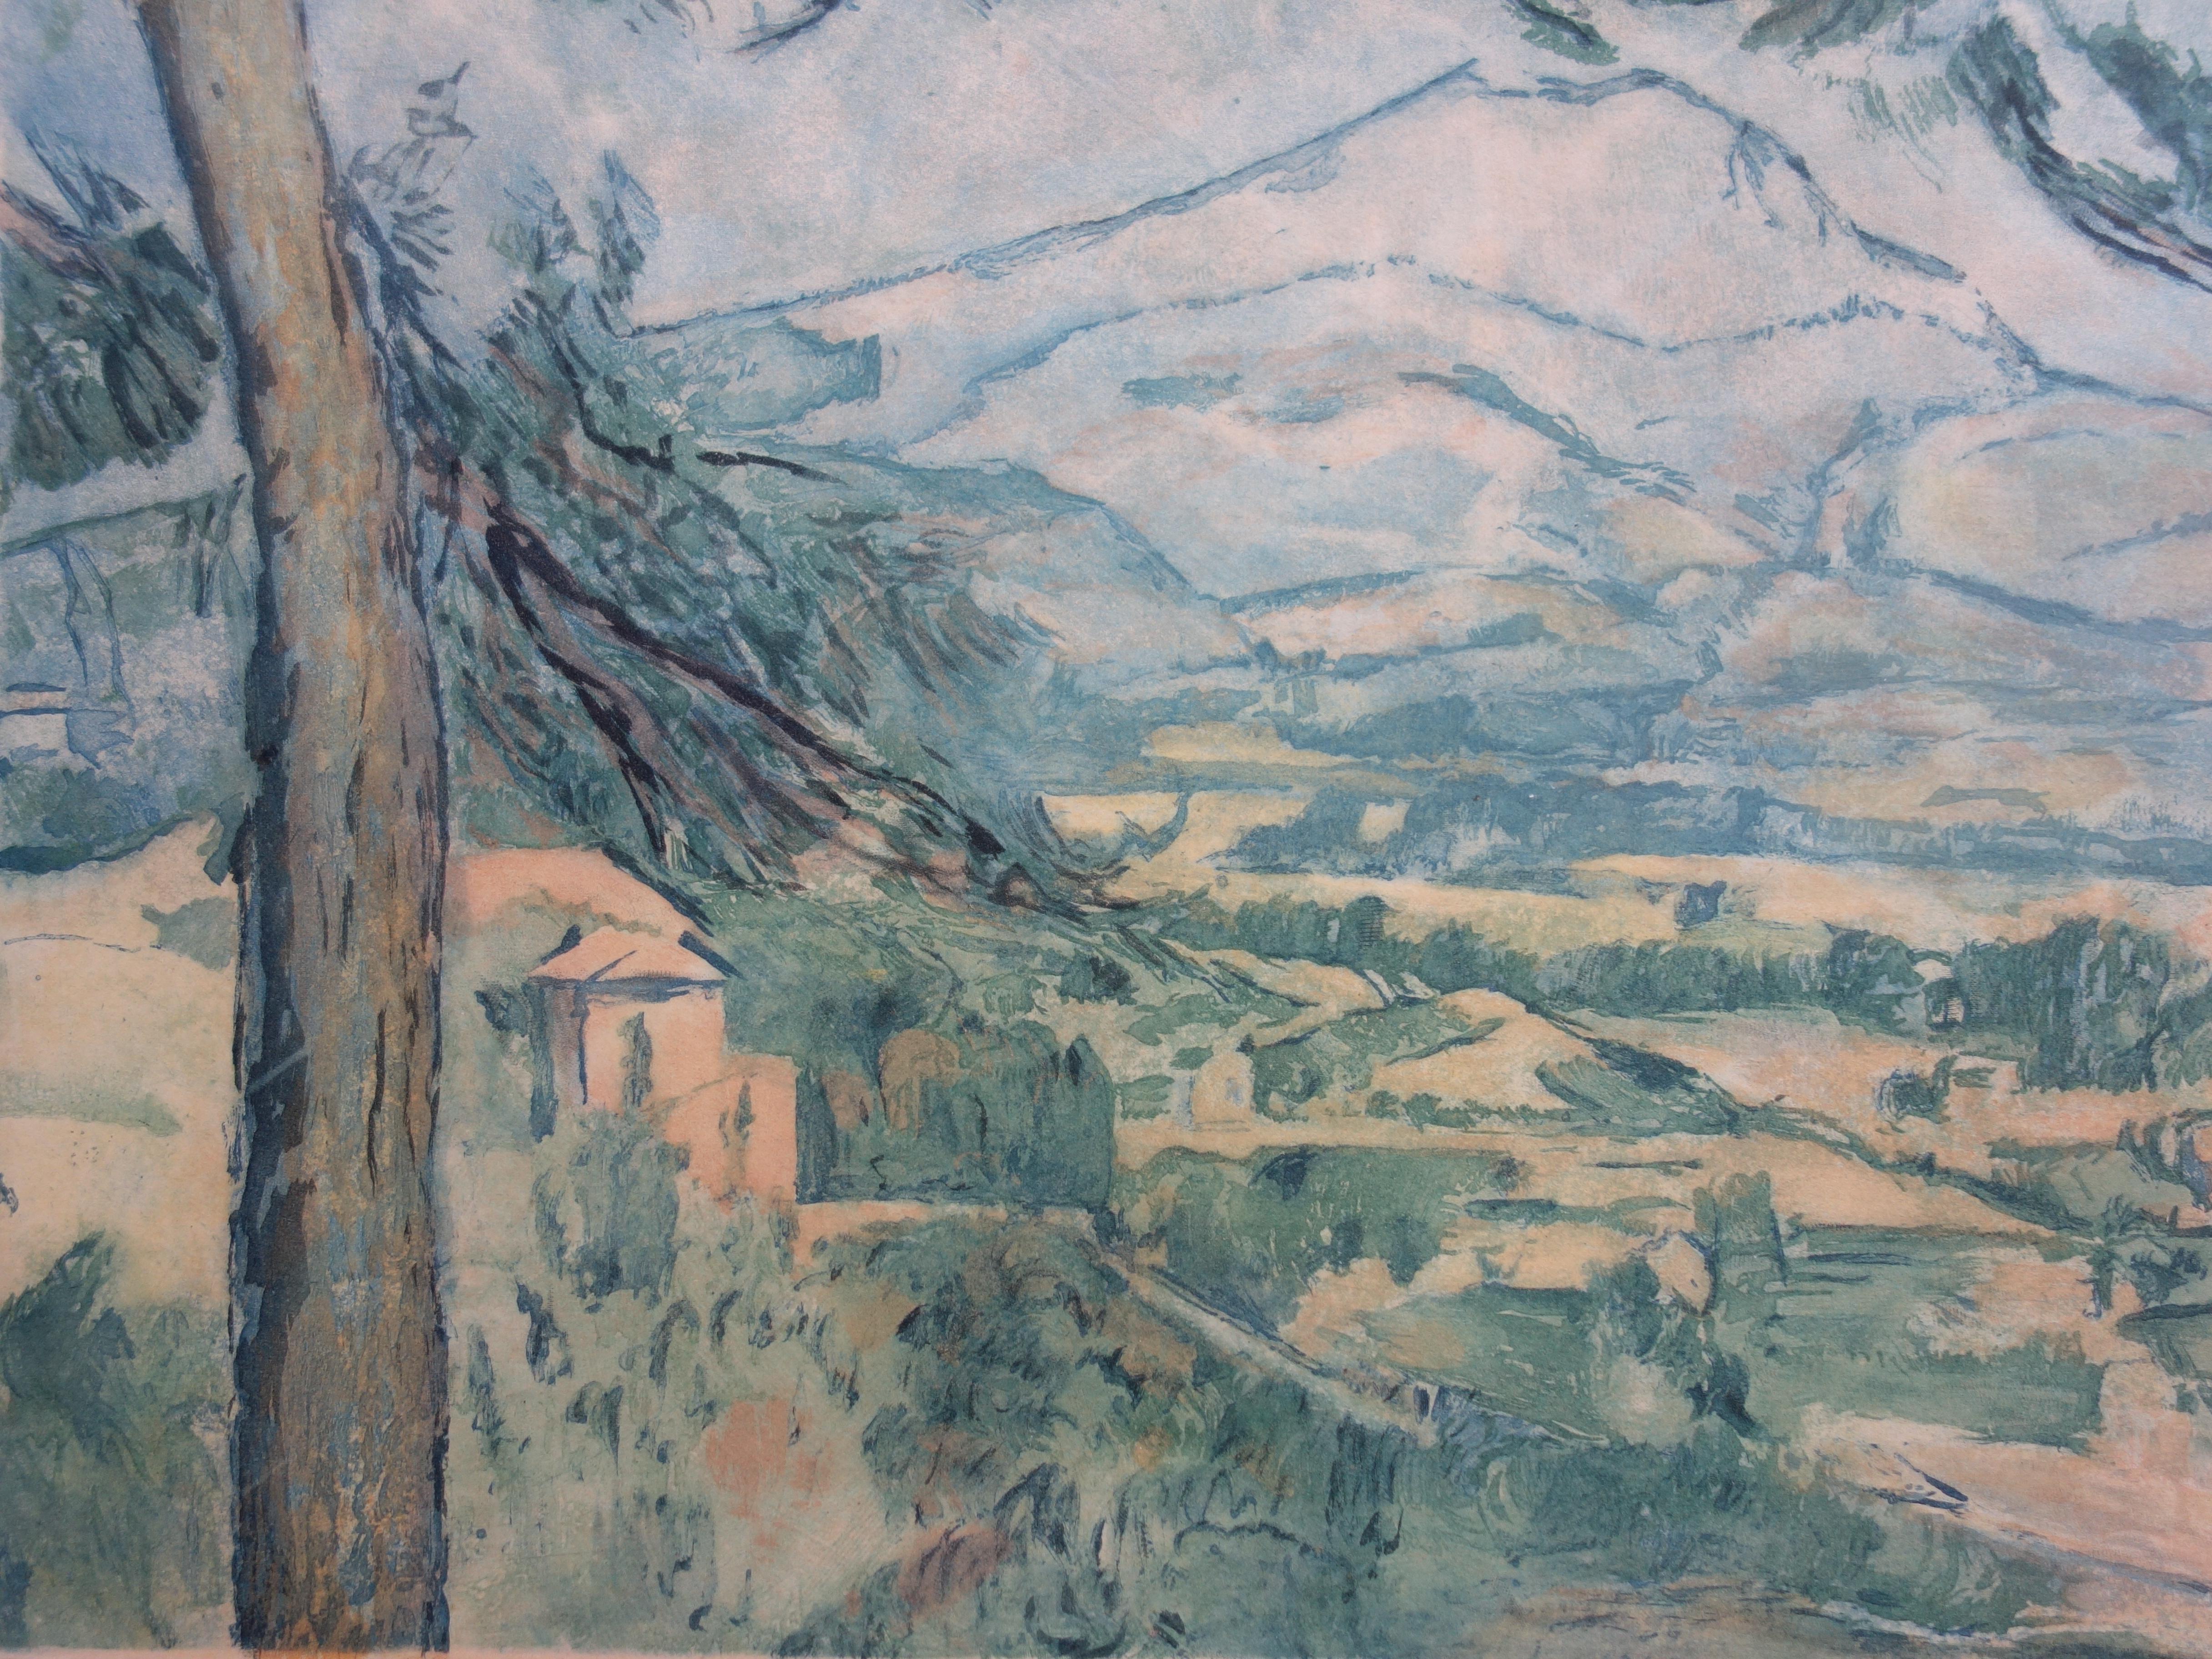 Paul CÉZANNE (after)
Provence : Sainte Victoire Mountain

Etching and aquatint
Engraved by Jacques Villon after the painting of Cezanne
Signature printed in the plate
On vellum 57 x 74 cm (c. 23 x 30 inch)

REFERENCES : Catalogue raisonne